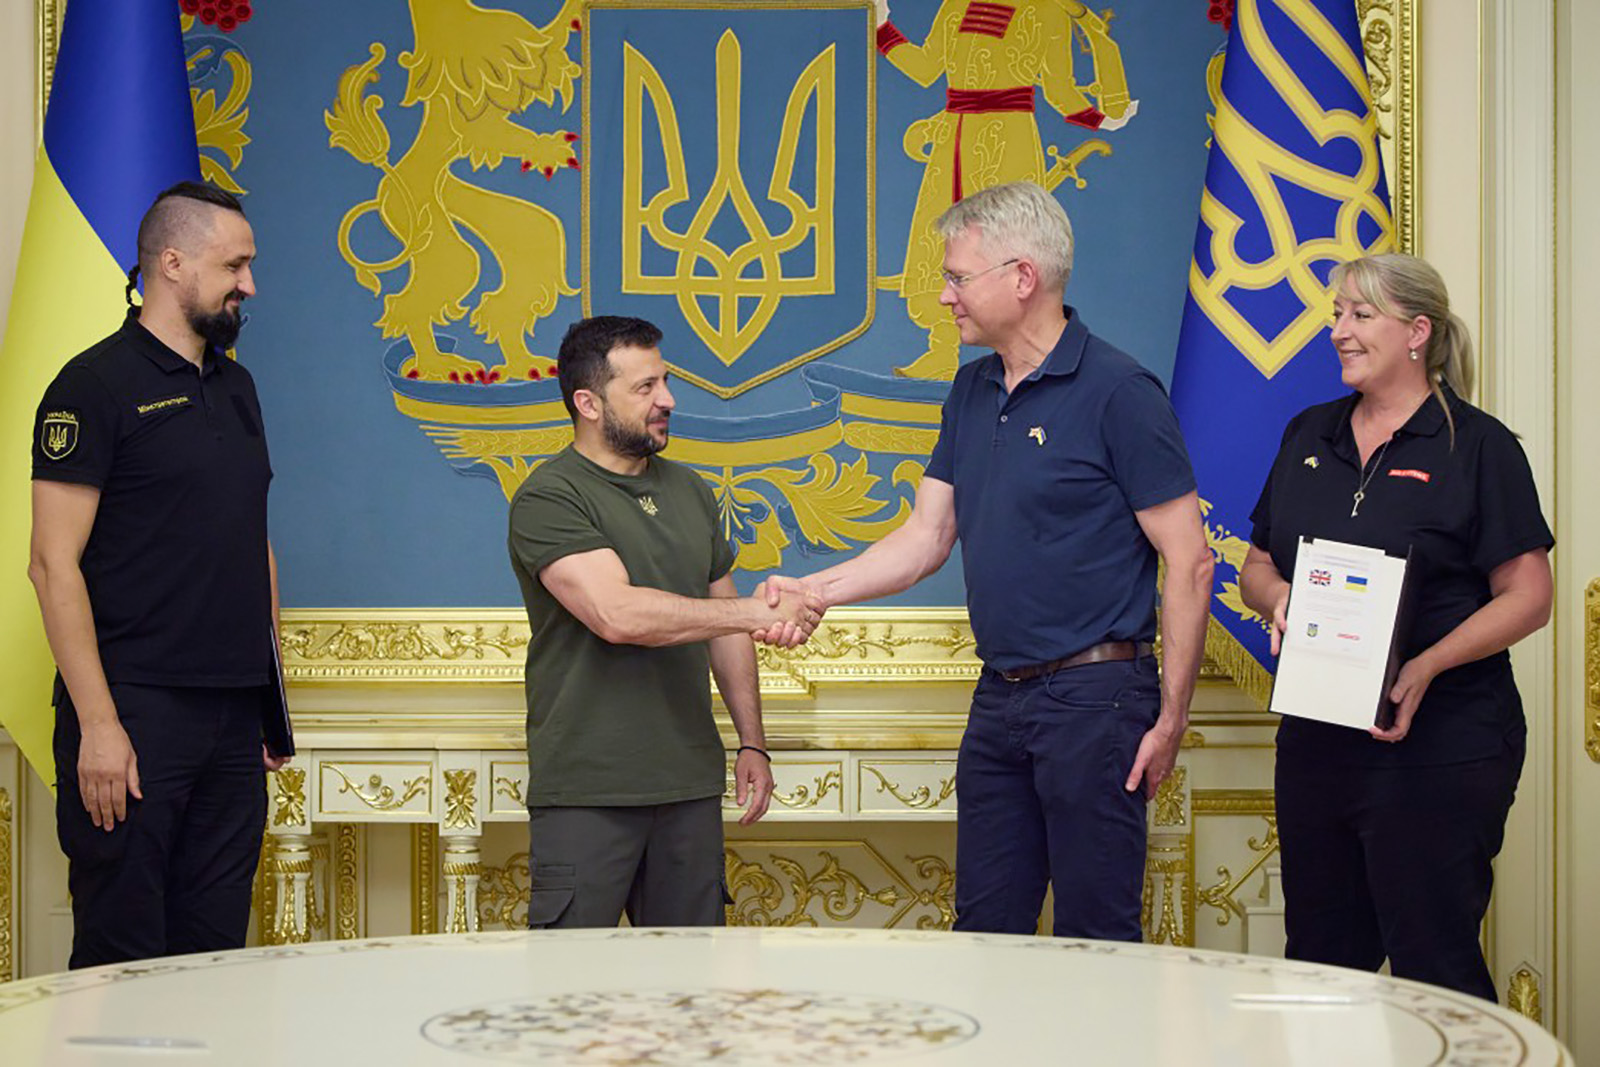 President of Ukraine Volodymyr Zelensky, center left, meets with representatives of BAE Systems CEO Charles Woodburn, center right, in Kyiv, Ukraine on August 31.